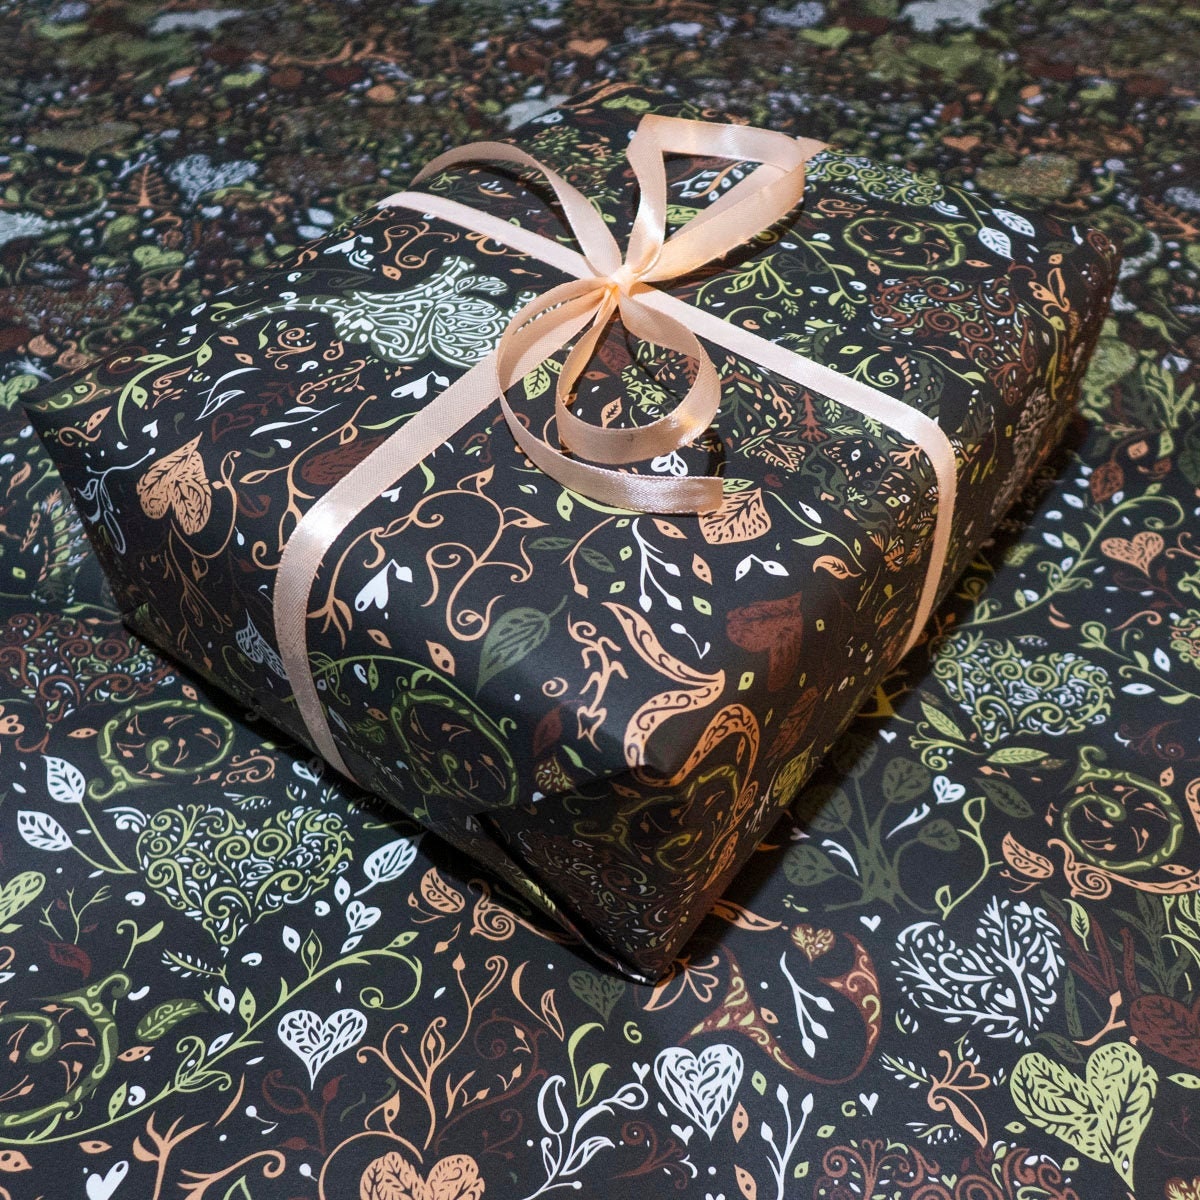 50x70cm Gift Wrapping Paper for Valentine's Day Birthday Party